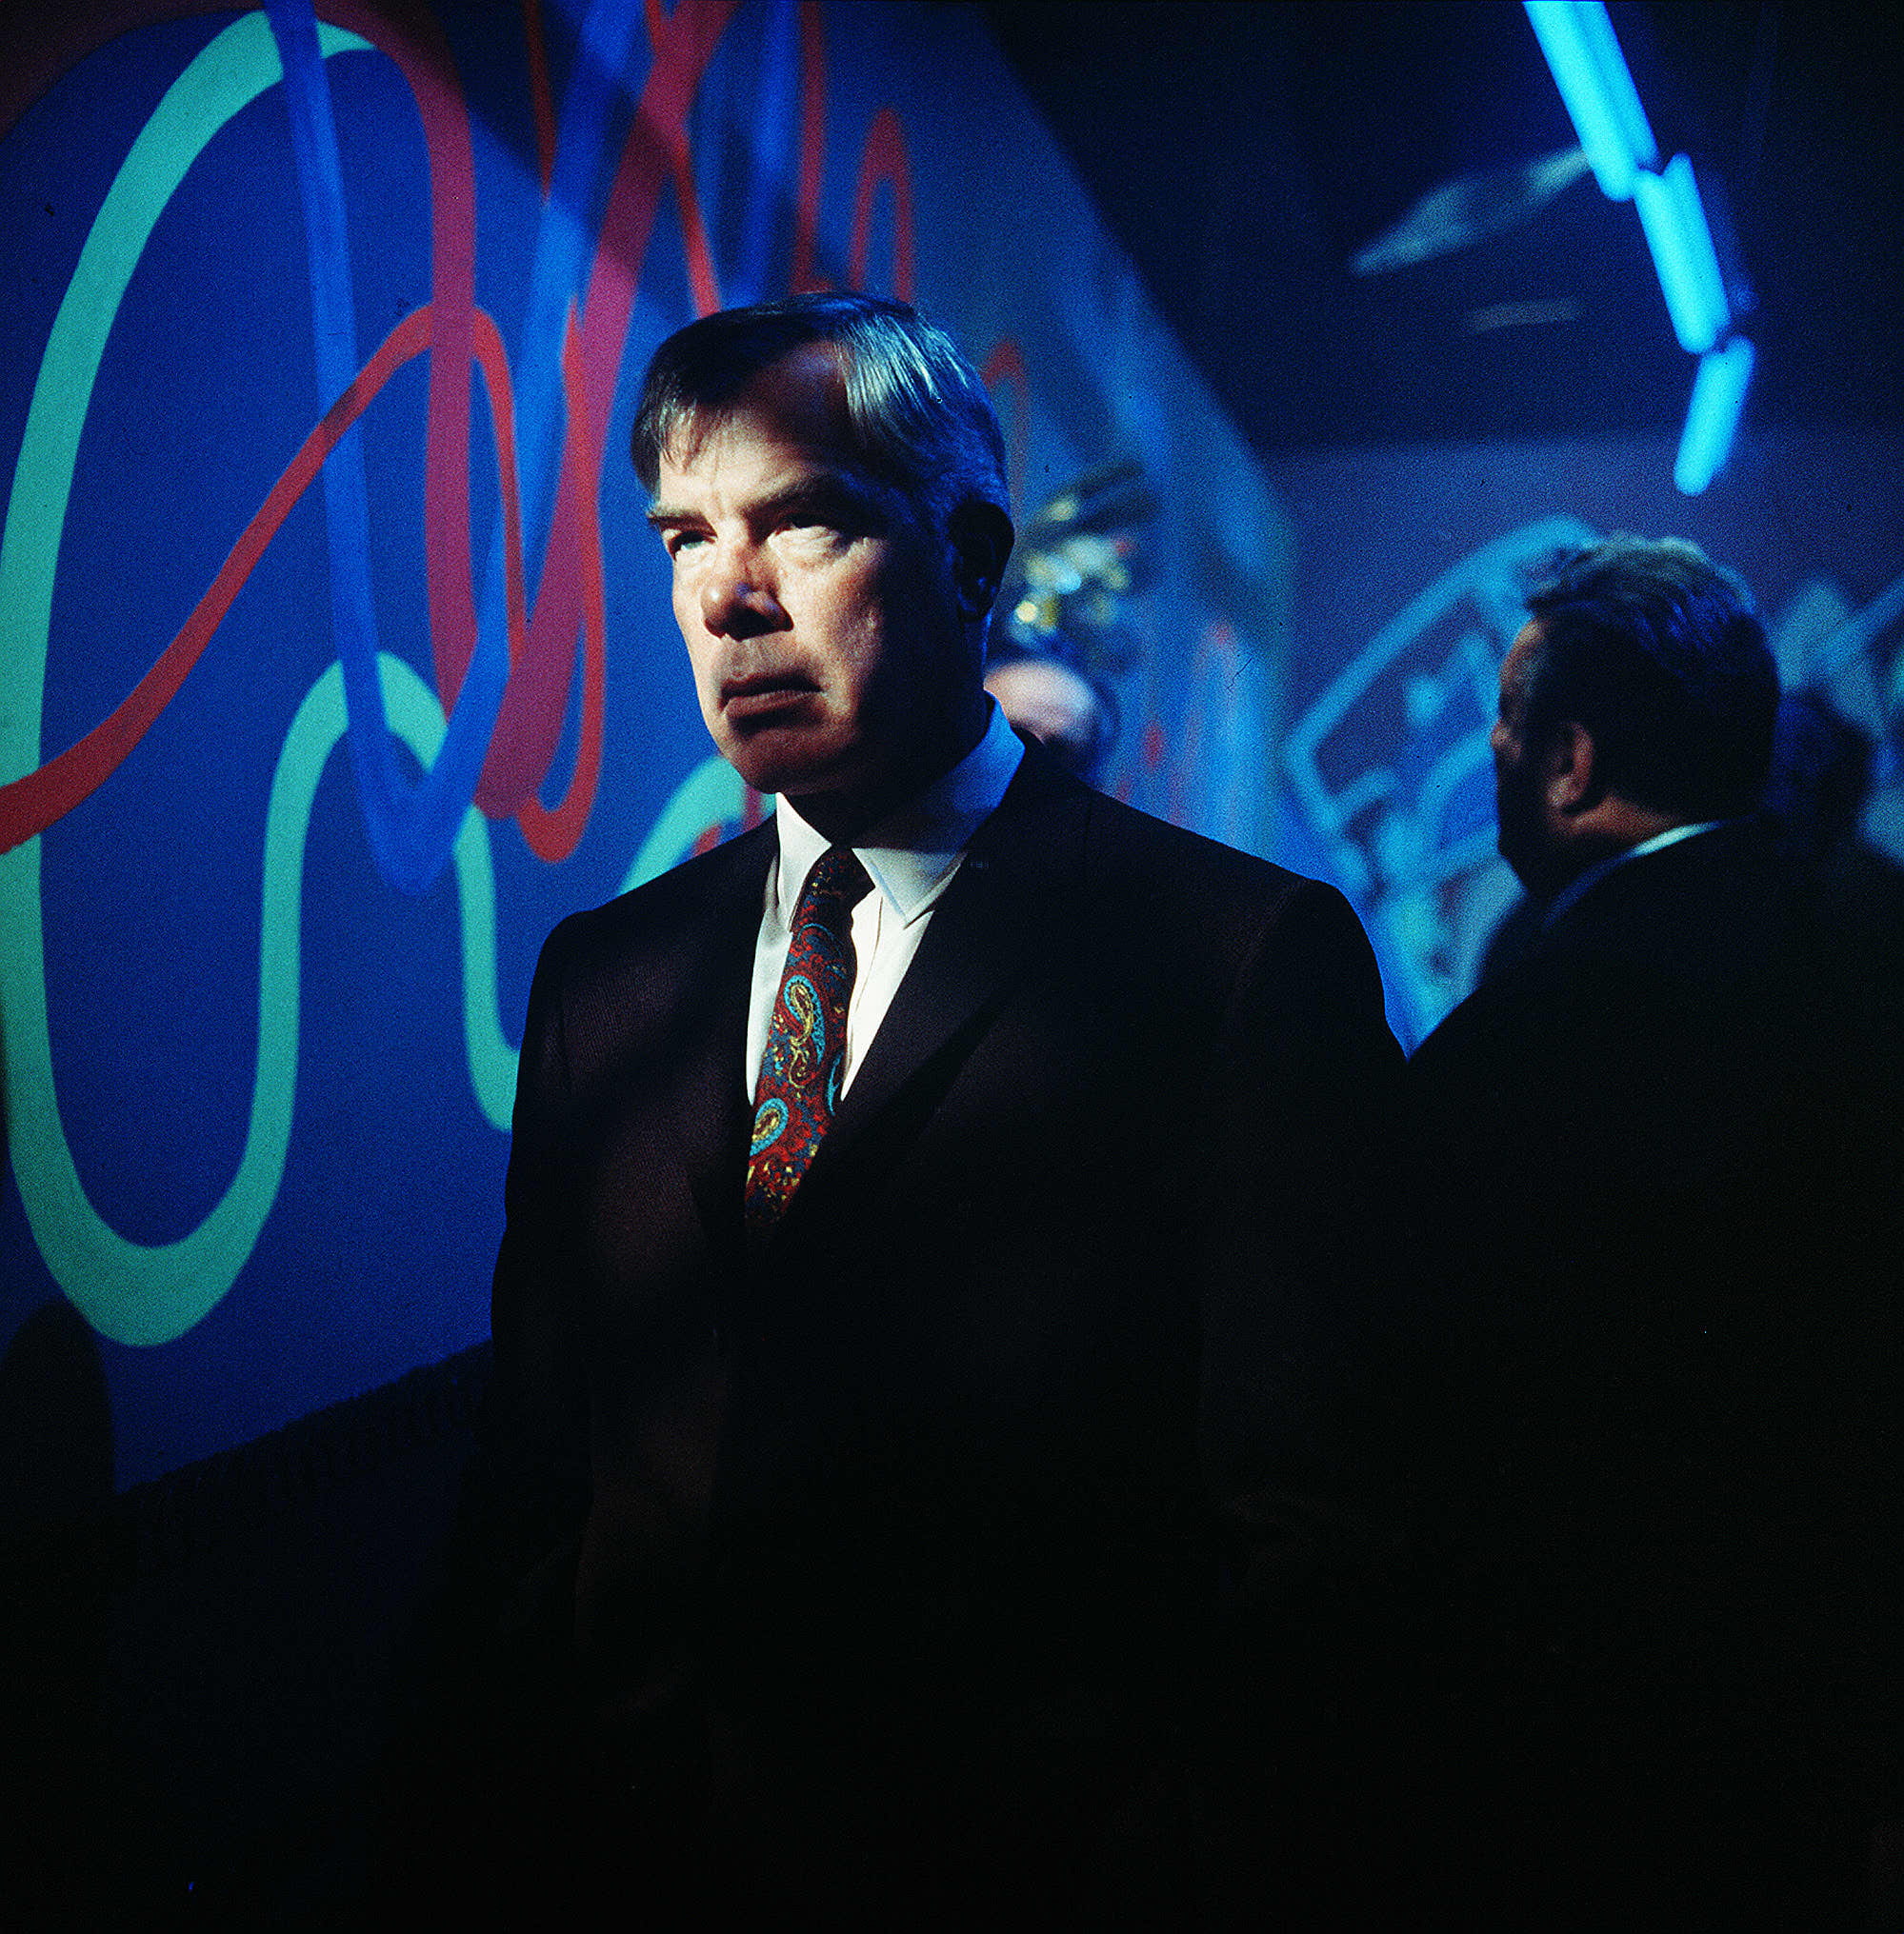 John Boorman's POINT BLANK starring Lee Marvin Credit: [ MGM / THE KOBAL COLLECTION ]